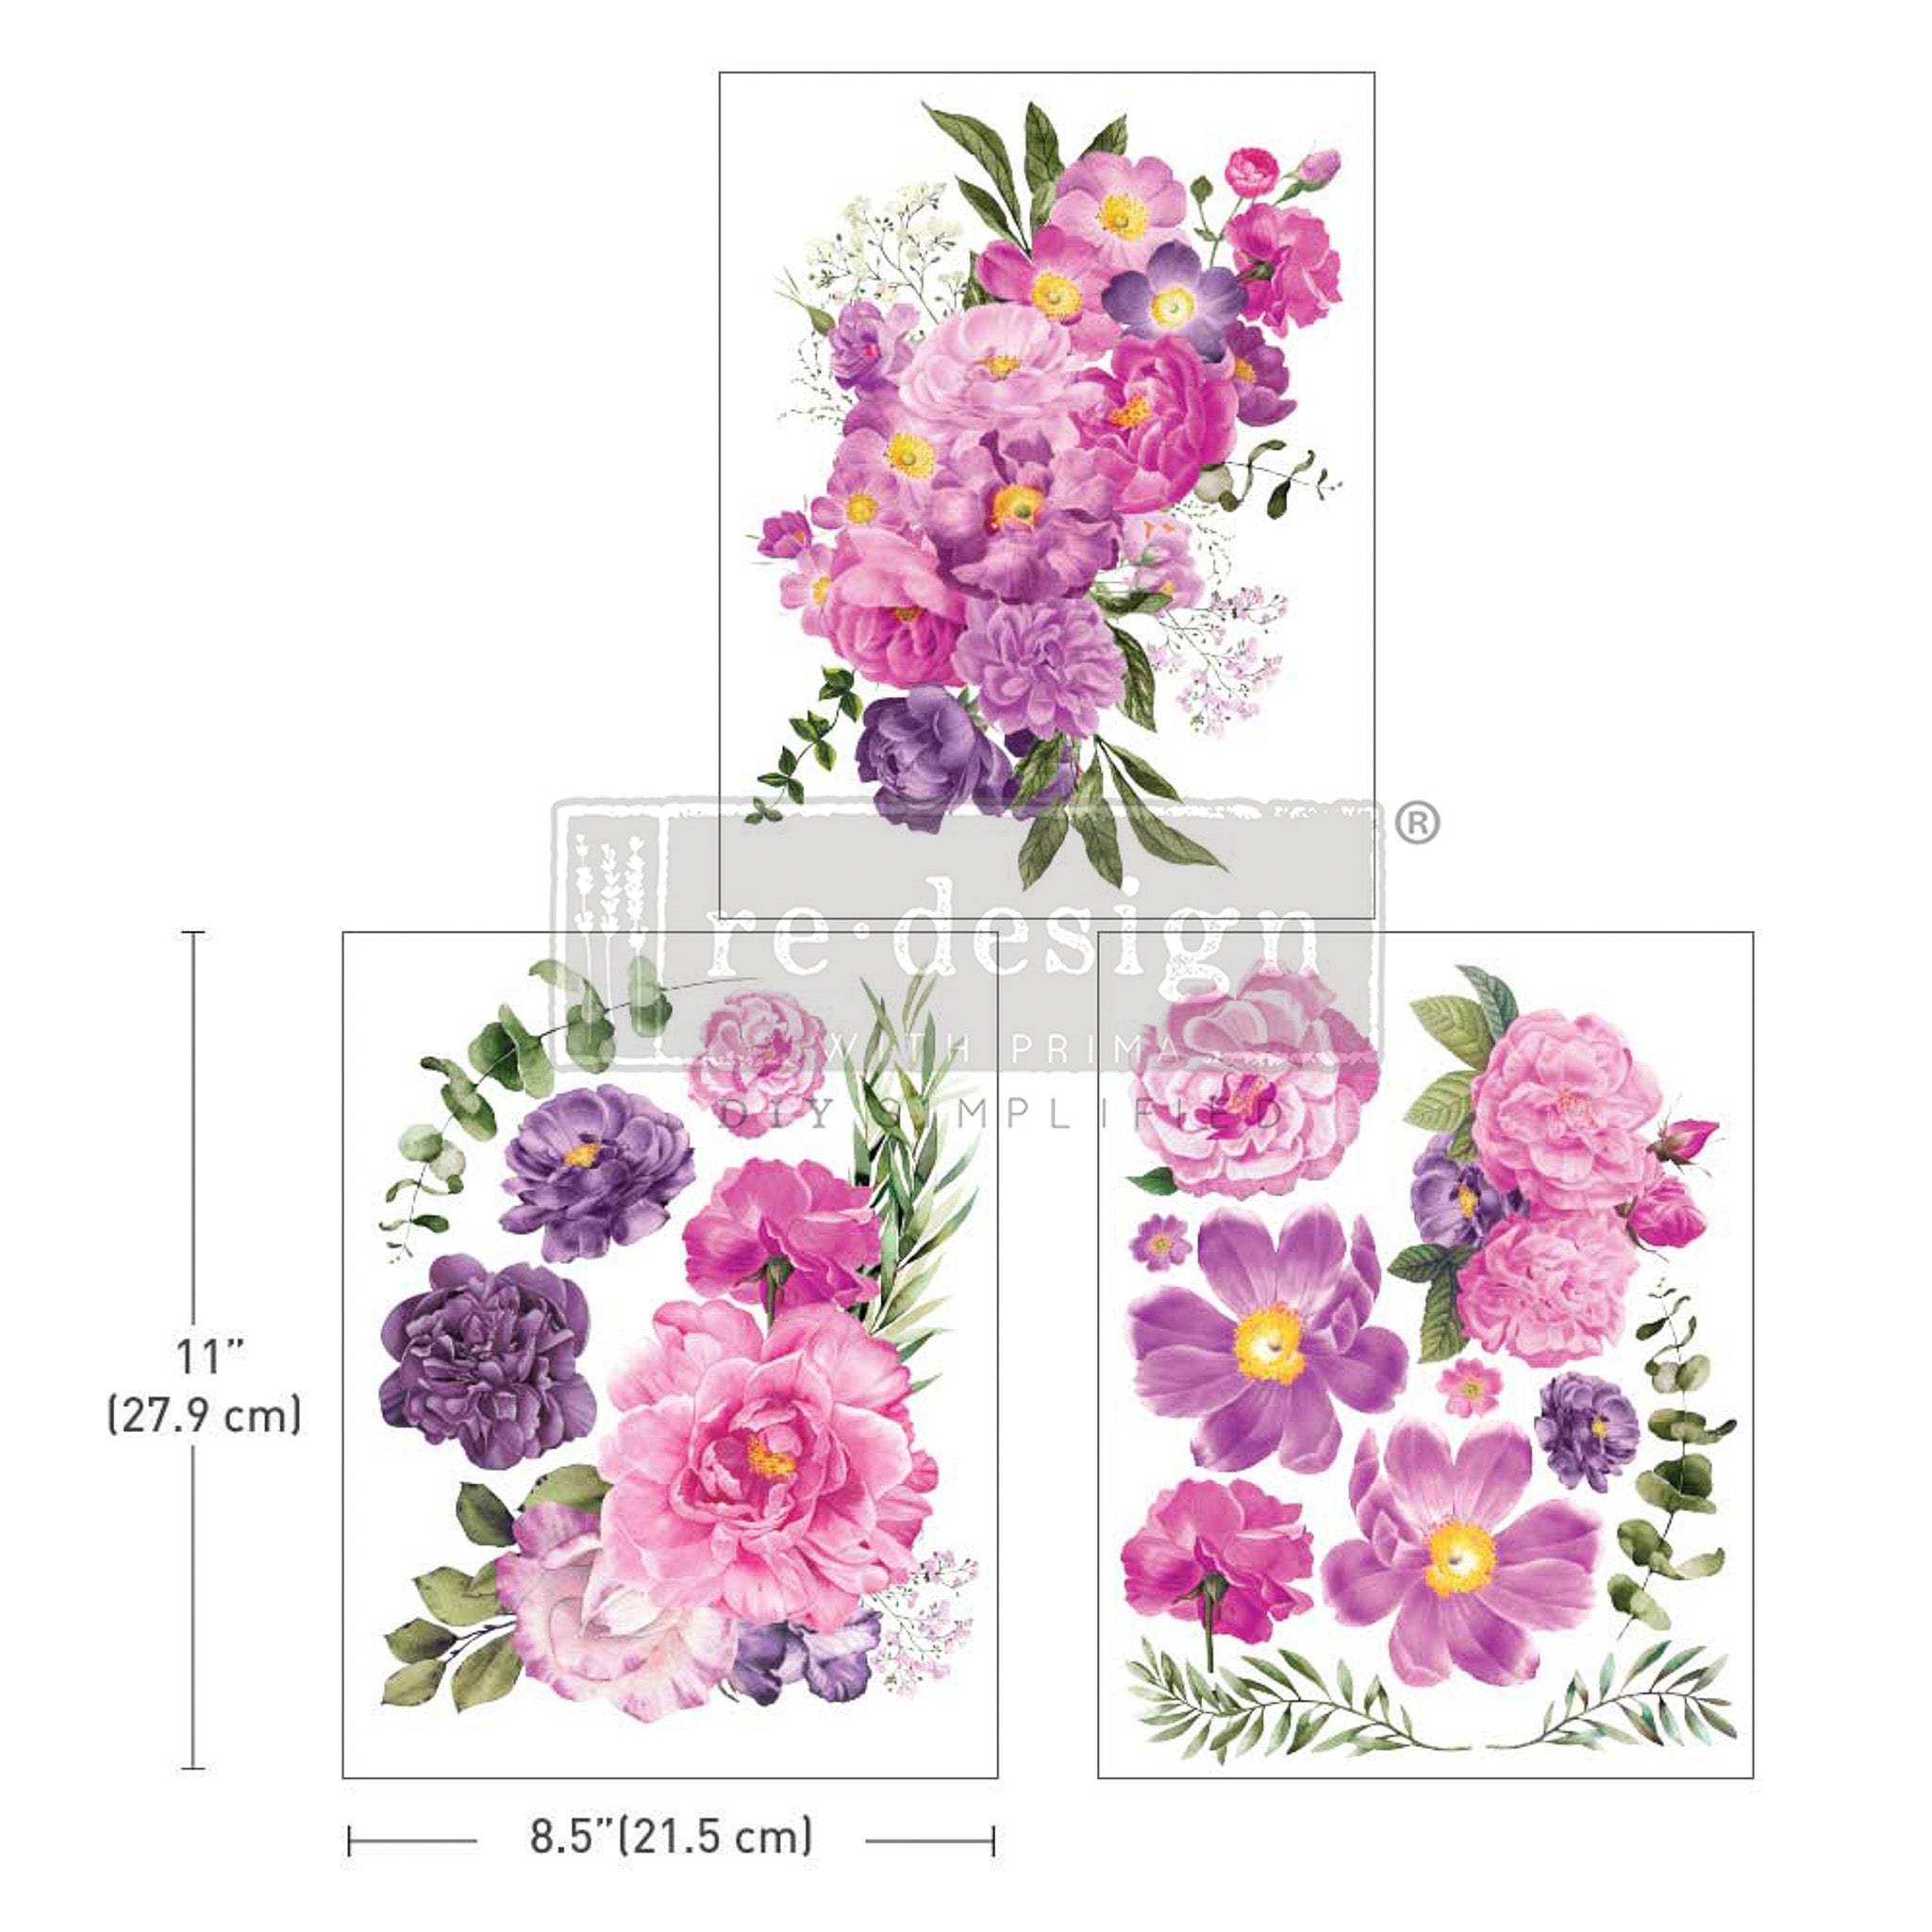 Three sheets of ReDesign with Prima's Purple Blossom small transfers. Measurements for 1 sheet reads 11" [27.9 cm] by 8.5" [21.5 cm].